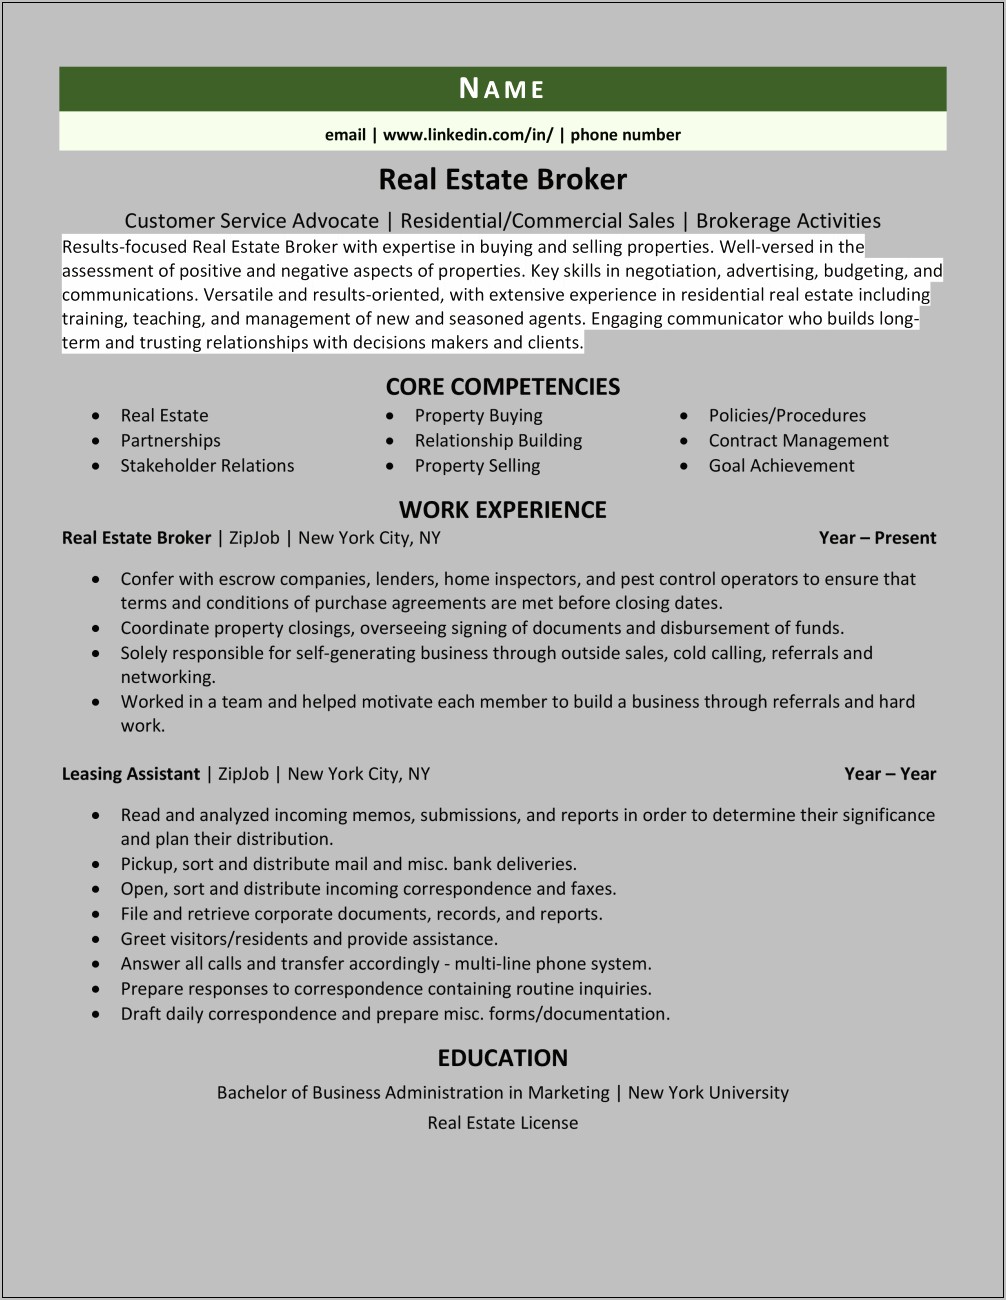 Professional Objective Resume Real Estate